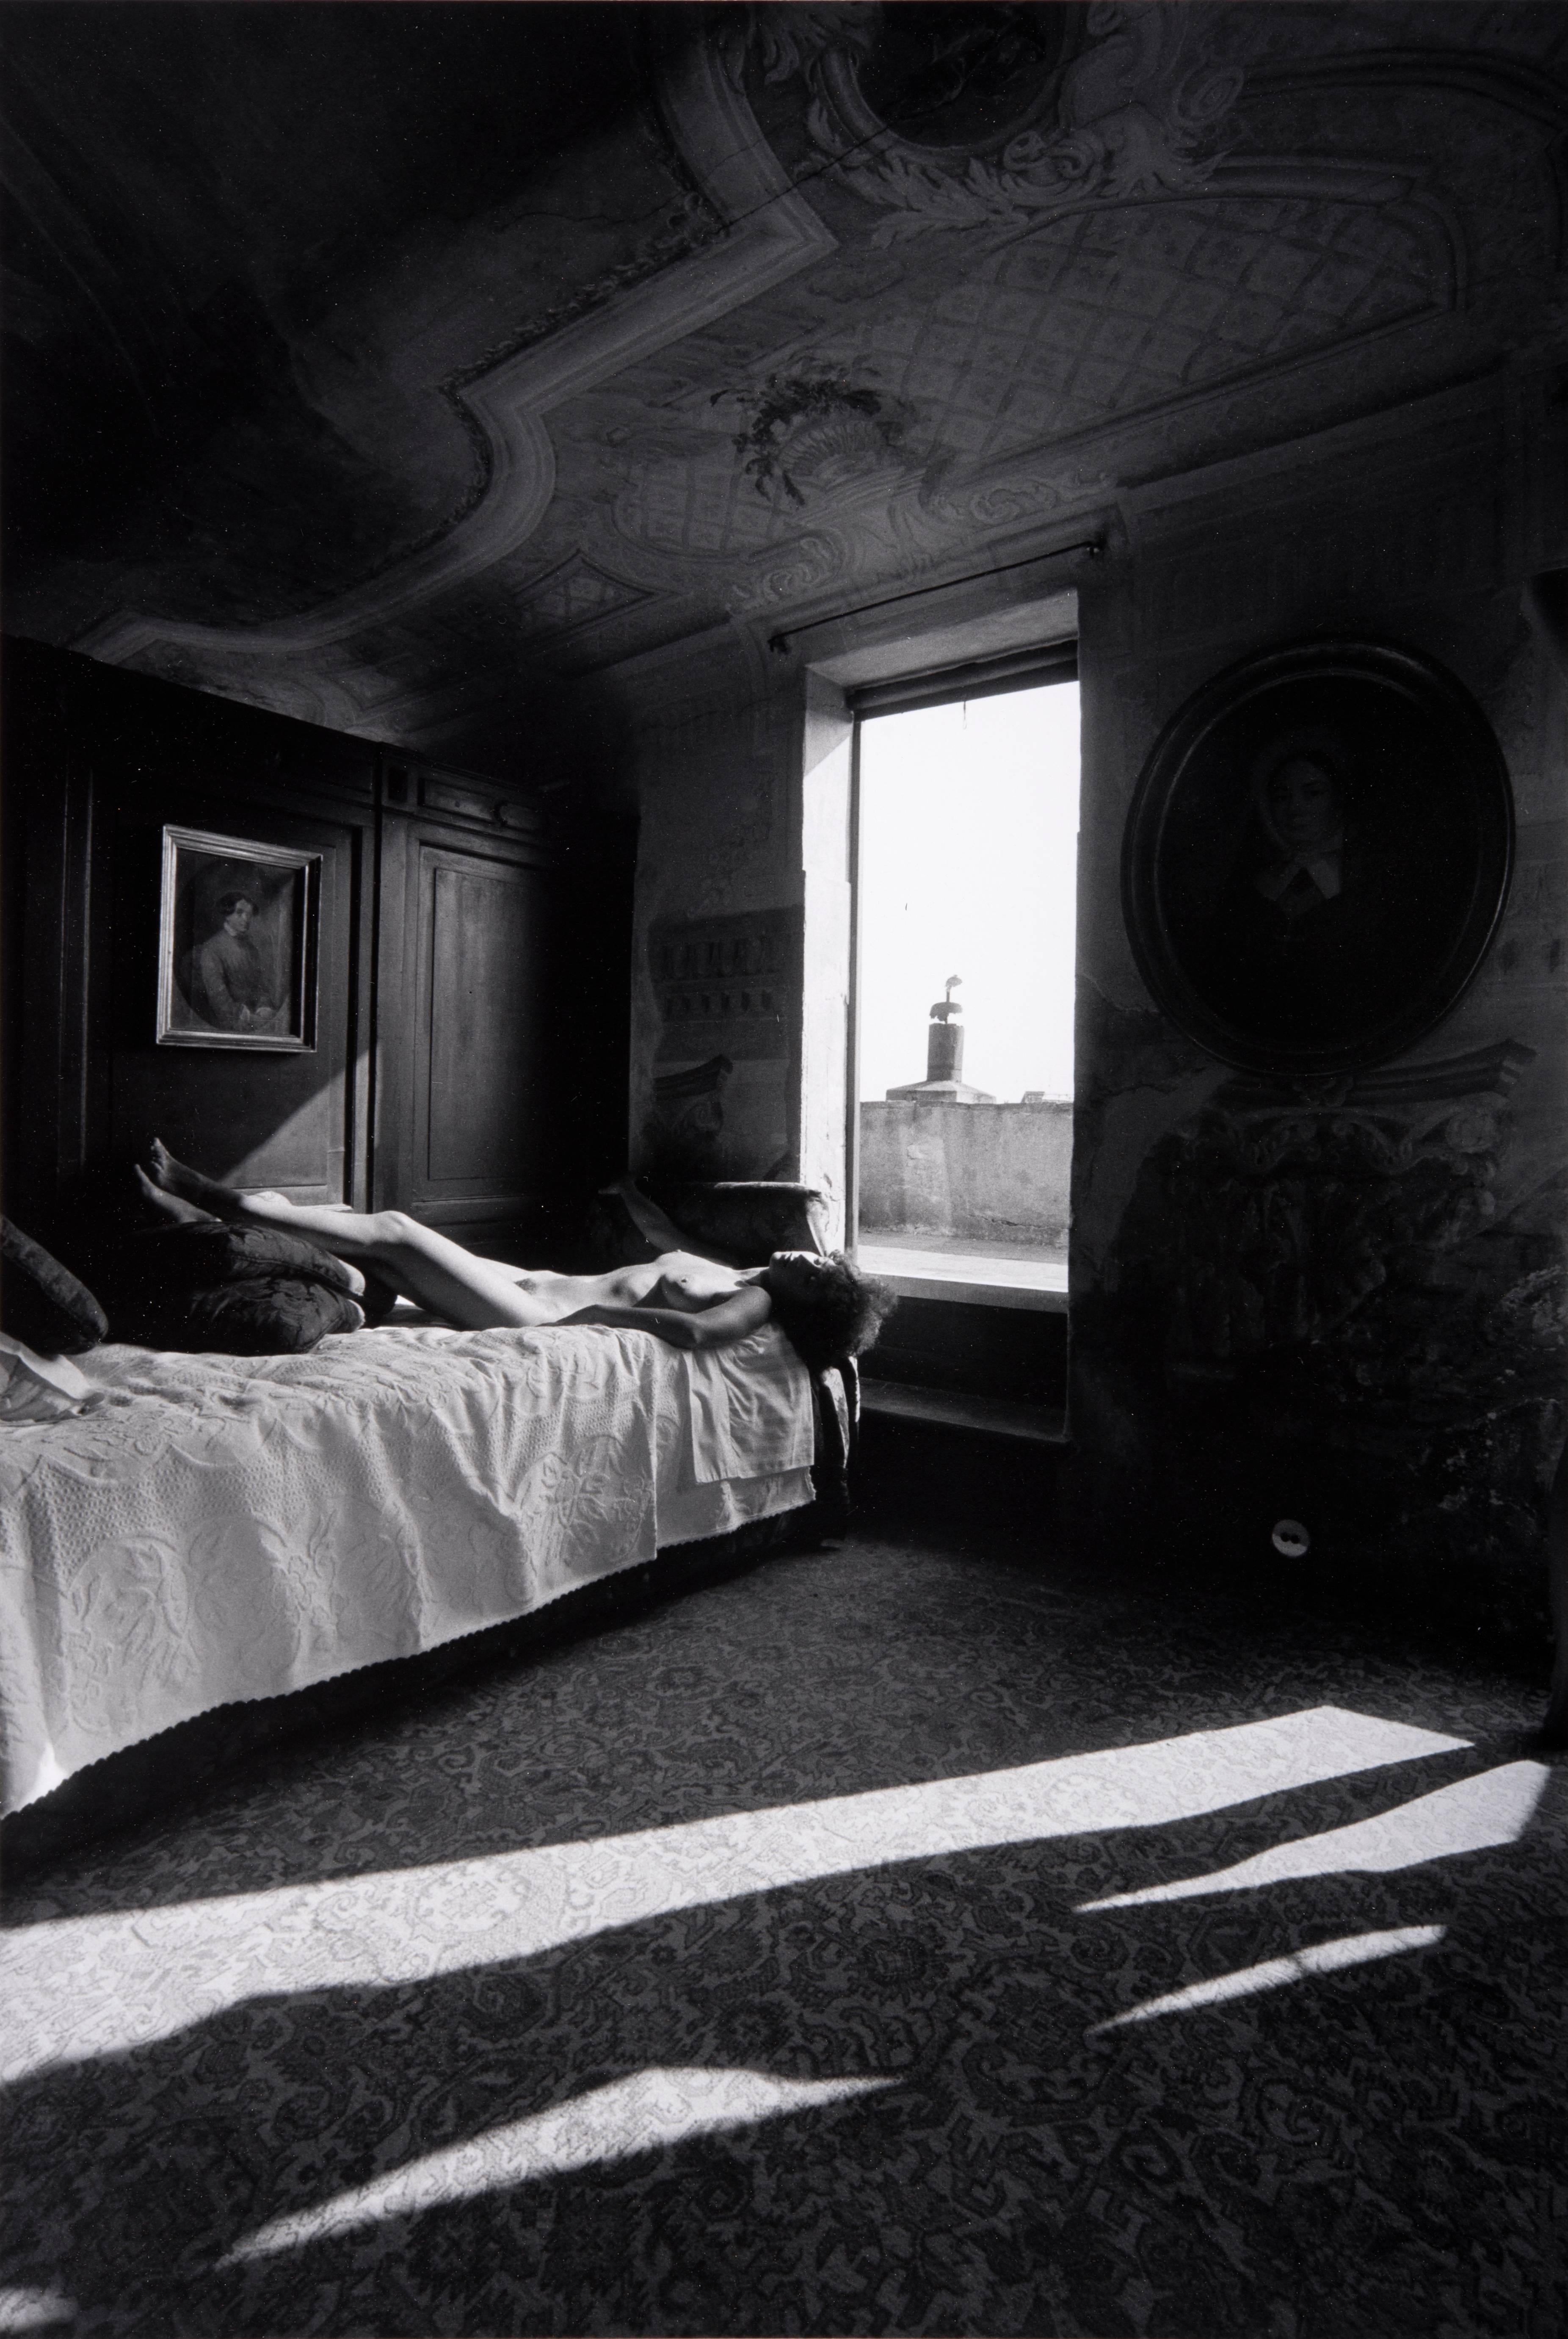 Lucien Clergue Nude Photograph - Nudes in an interior, Venice